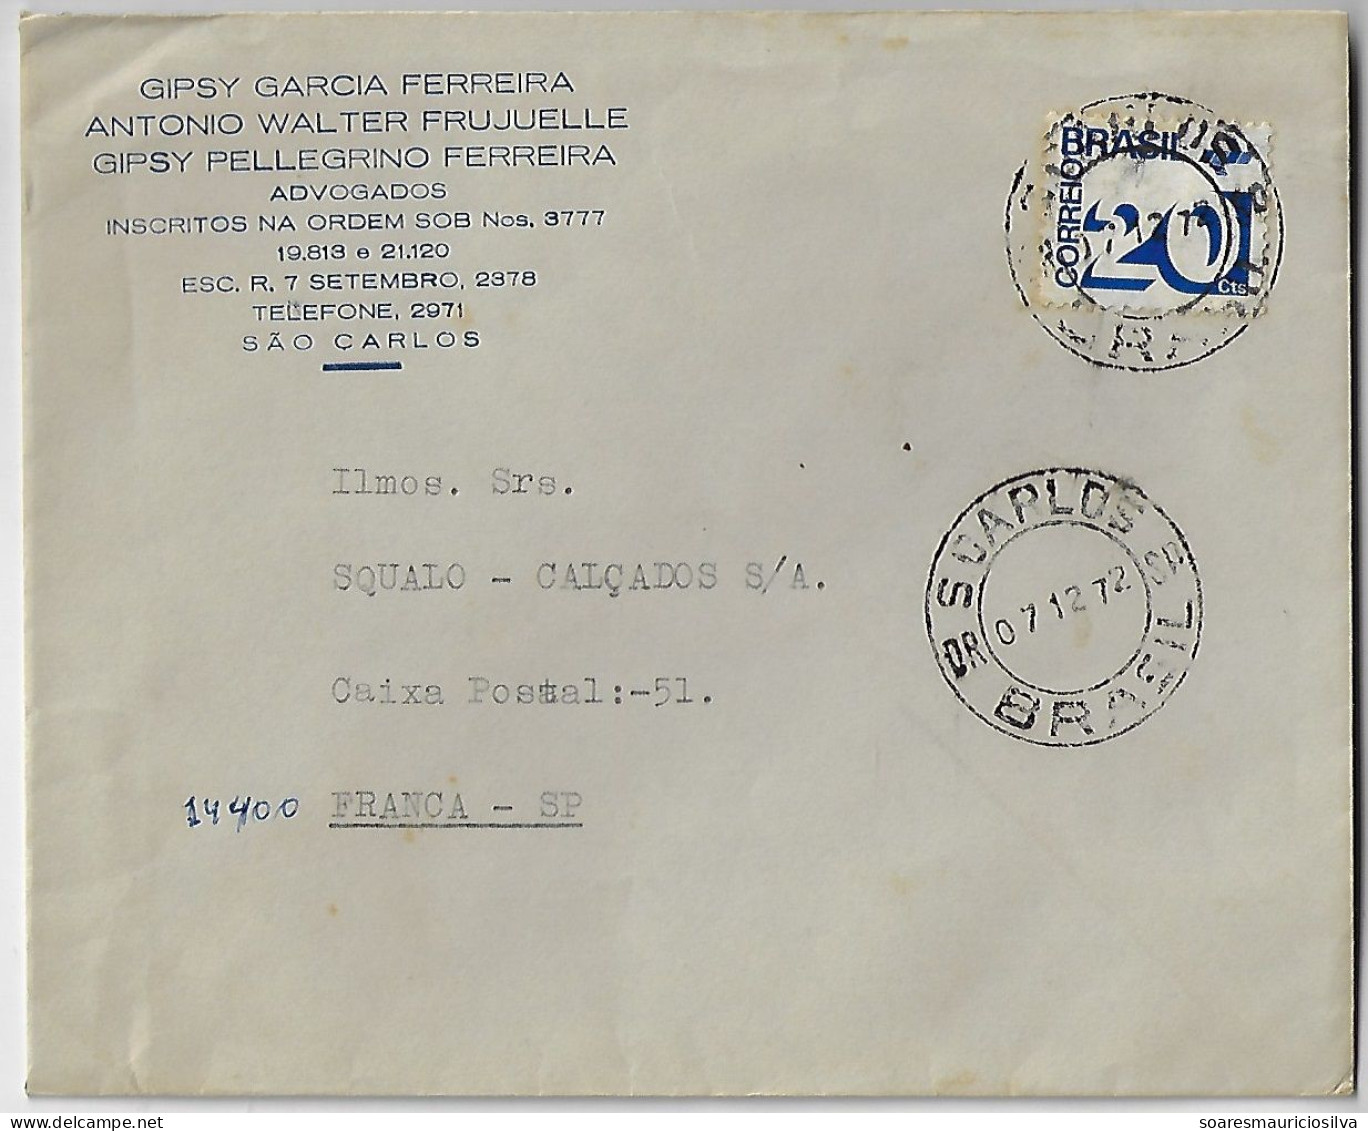 Brazil 1972 Law Office commercial Cover Sent From São Carlos To Franca Definitive Stamp 20 Cents - Covers & Documents